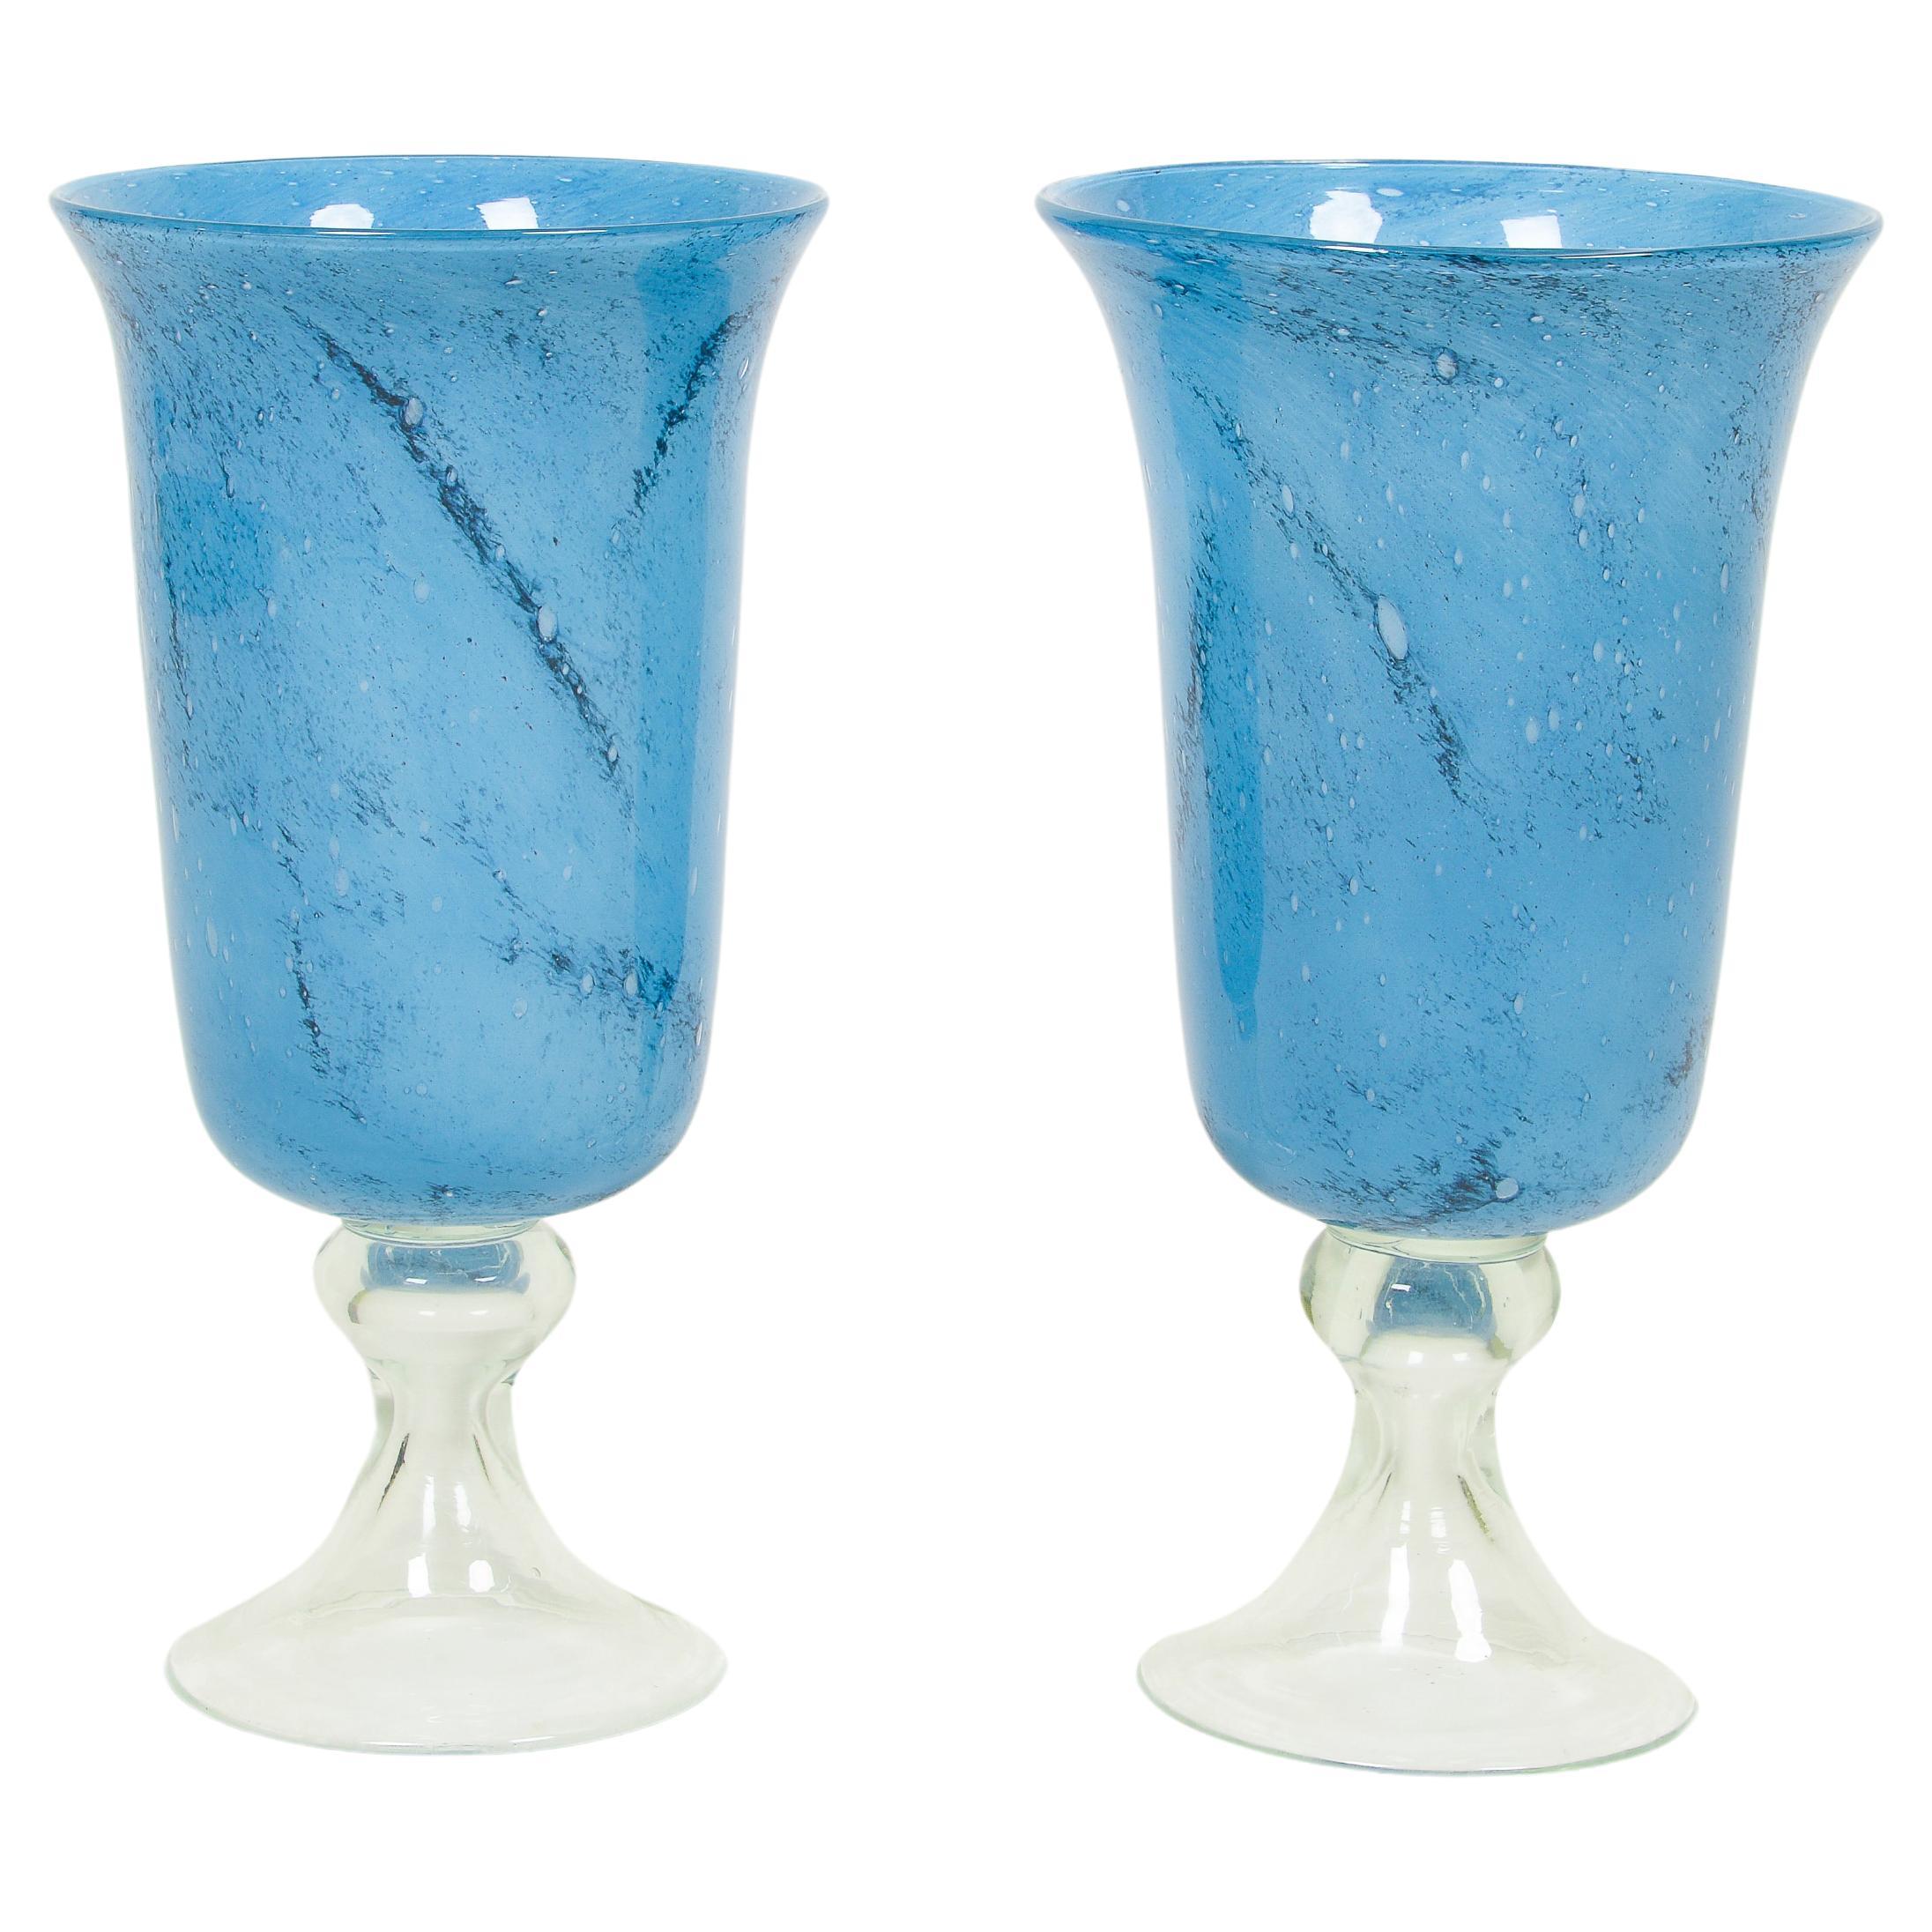 A Pair of Blue Glass Candle Photophores